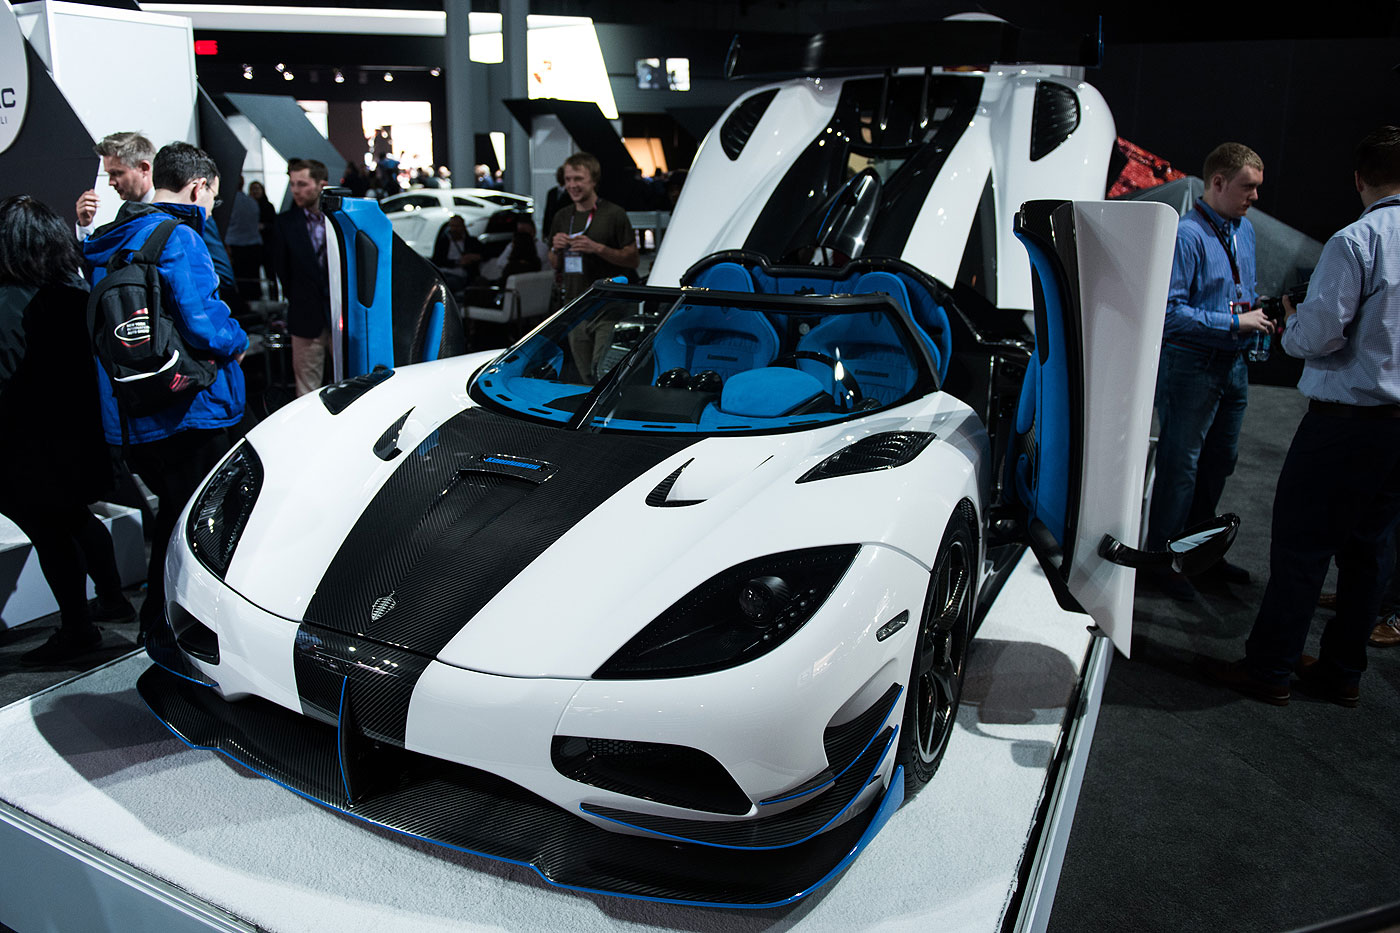 bao mike tyson surprised the world by giving his son amir tyson a koenigsegg agera r to congratulate him on setting a record for defeating an opponent in just seconds 654f8d7fa7073 Mike Tyson Surprised The World By Giving His Son Amir Tyson A Koenigsegg Agera R To Congratulate Him On Setting A Record For Defeating An Opponent In Just 8 Seconds.